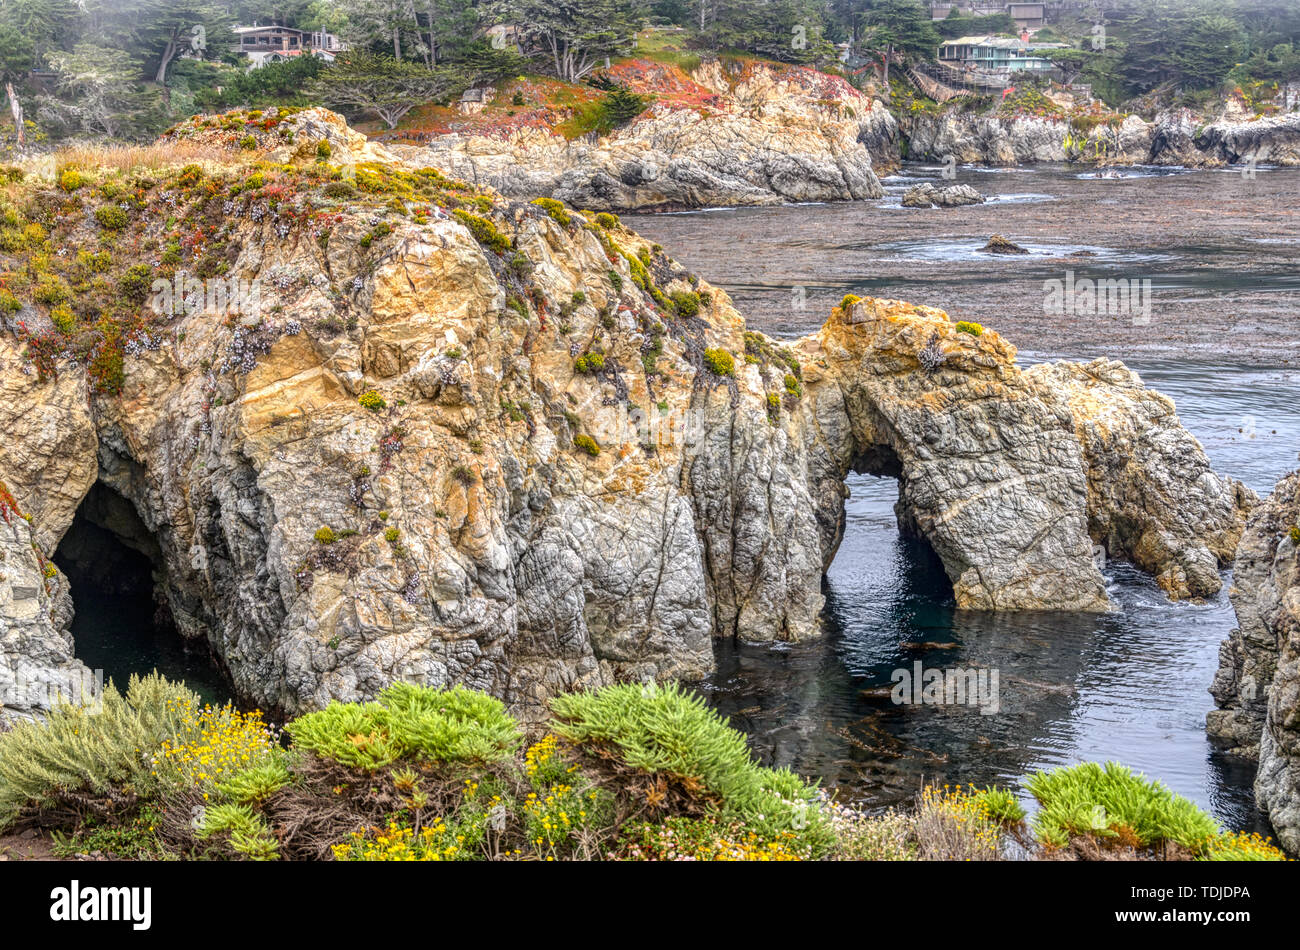 California's Central Coast shows its beauty with promontory covered with native plants and water passages below Stock Photo